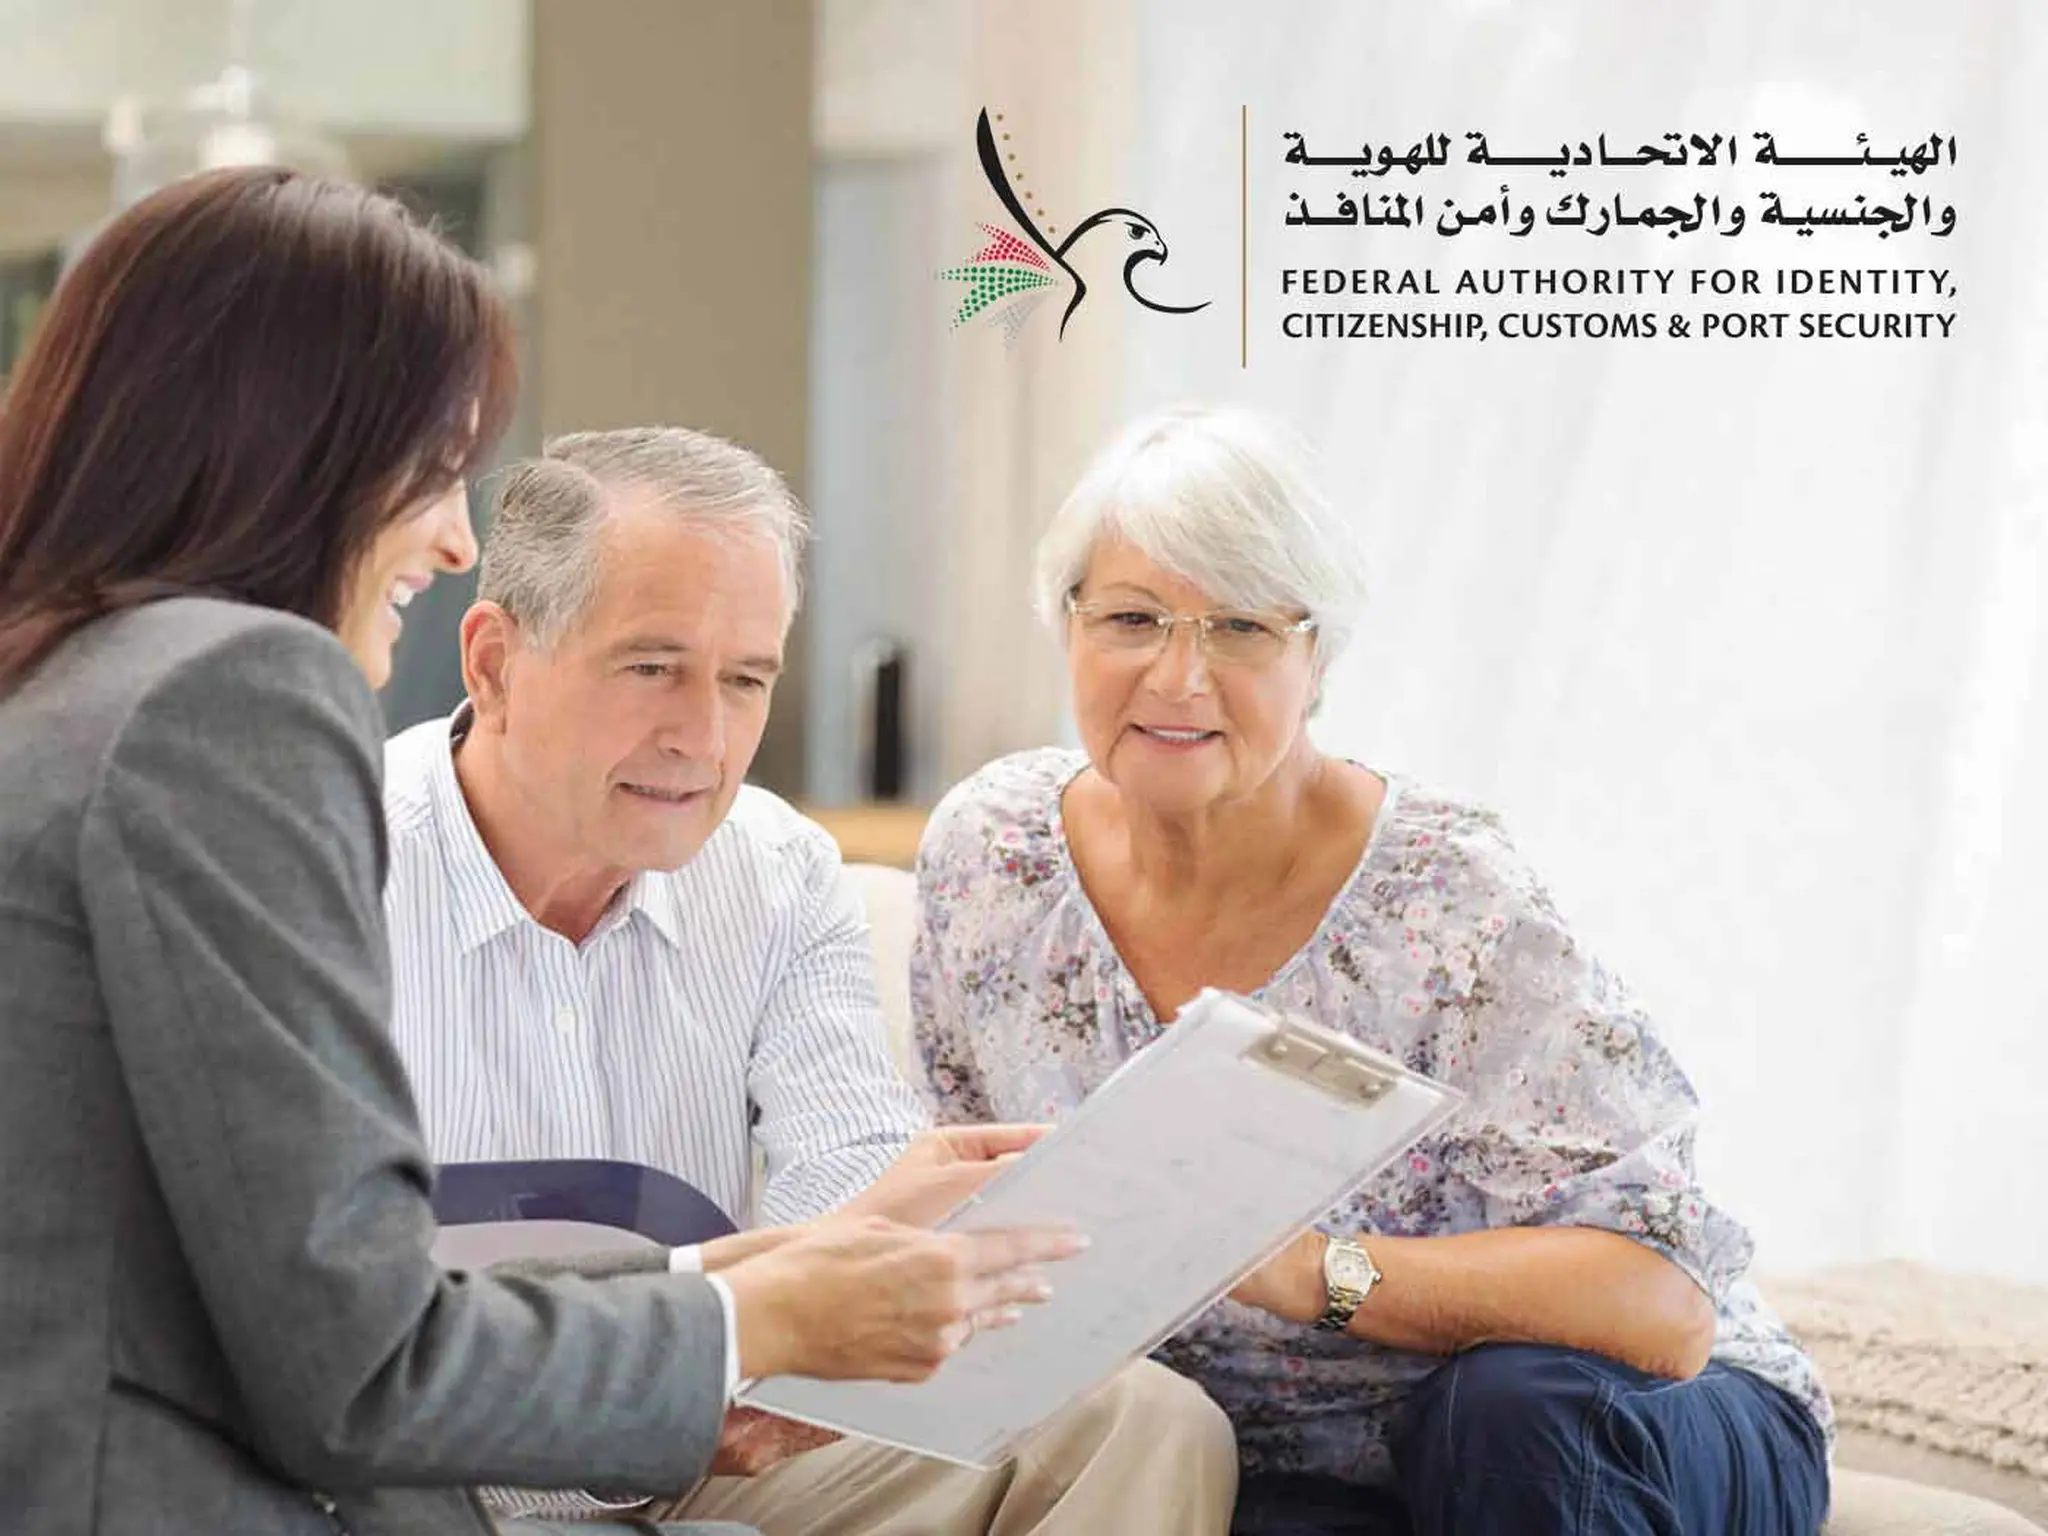 The UAE provides a 5-year residence visa to these residents for 720 dirhams